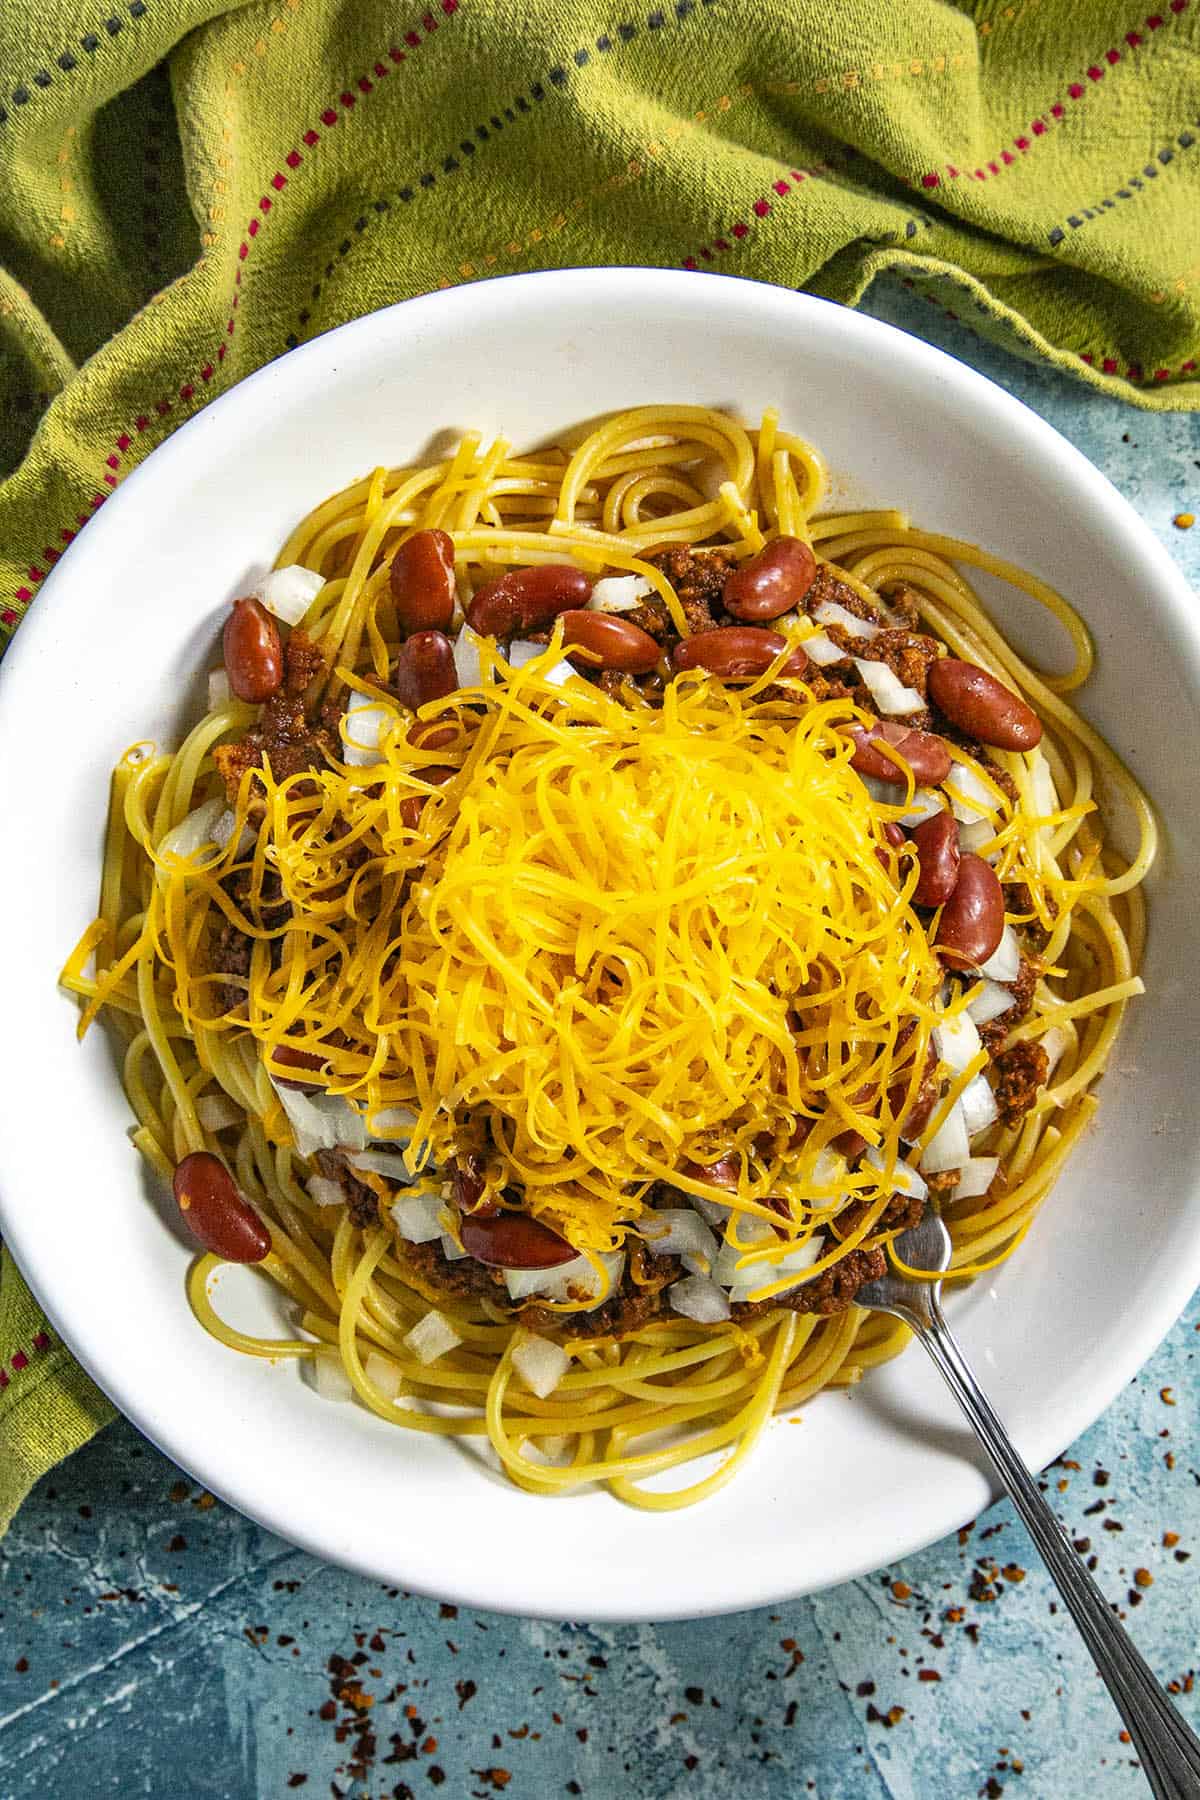 Cincinnati Chili in a bowl with spaghetti, topped with onions, beans, and cheddar cheese